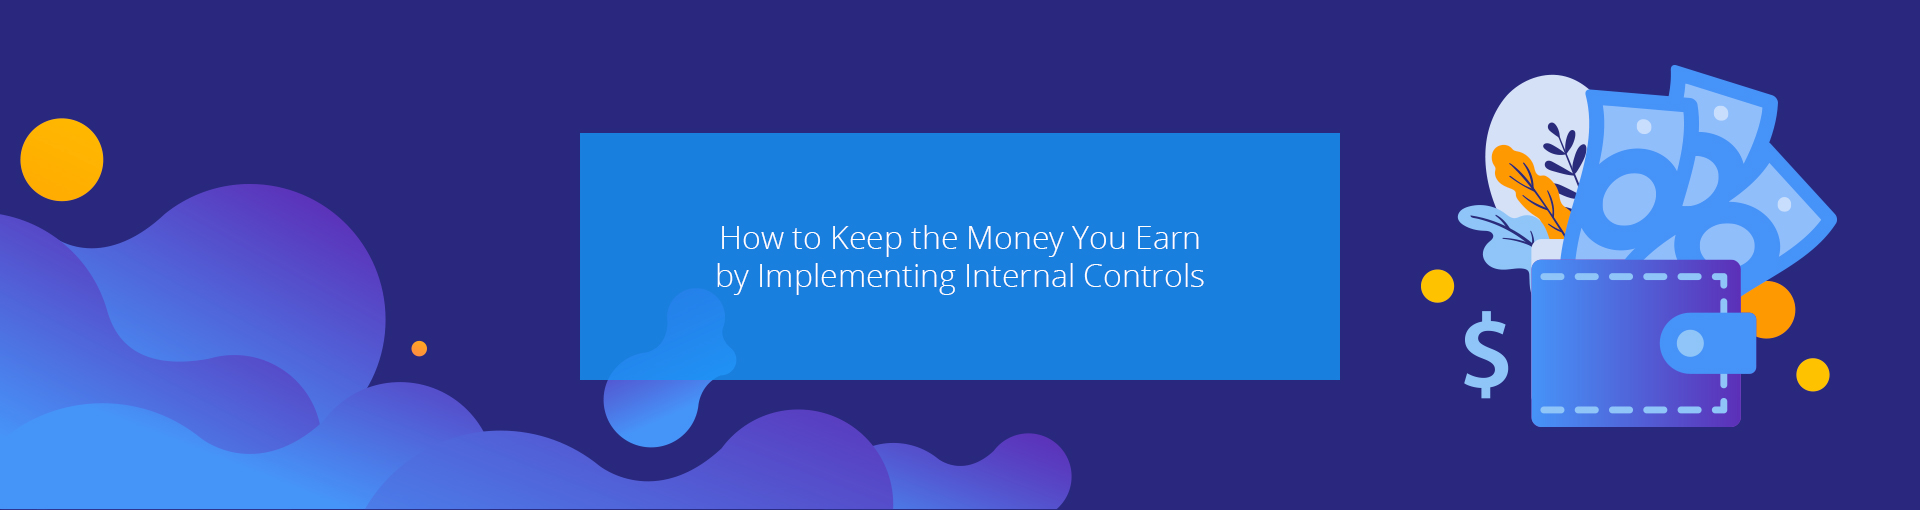 How to Keep the Money You Earn by Implementing Internal Controls Featured Image